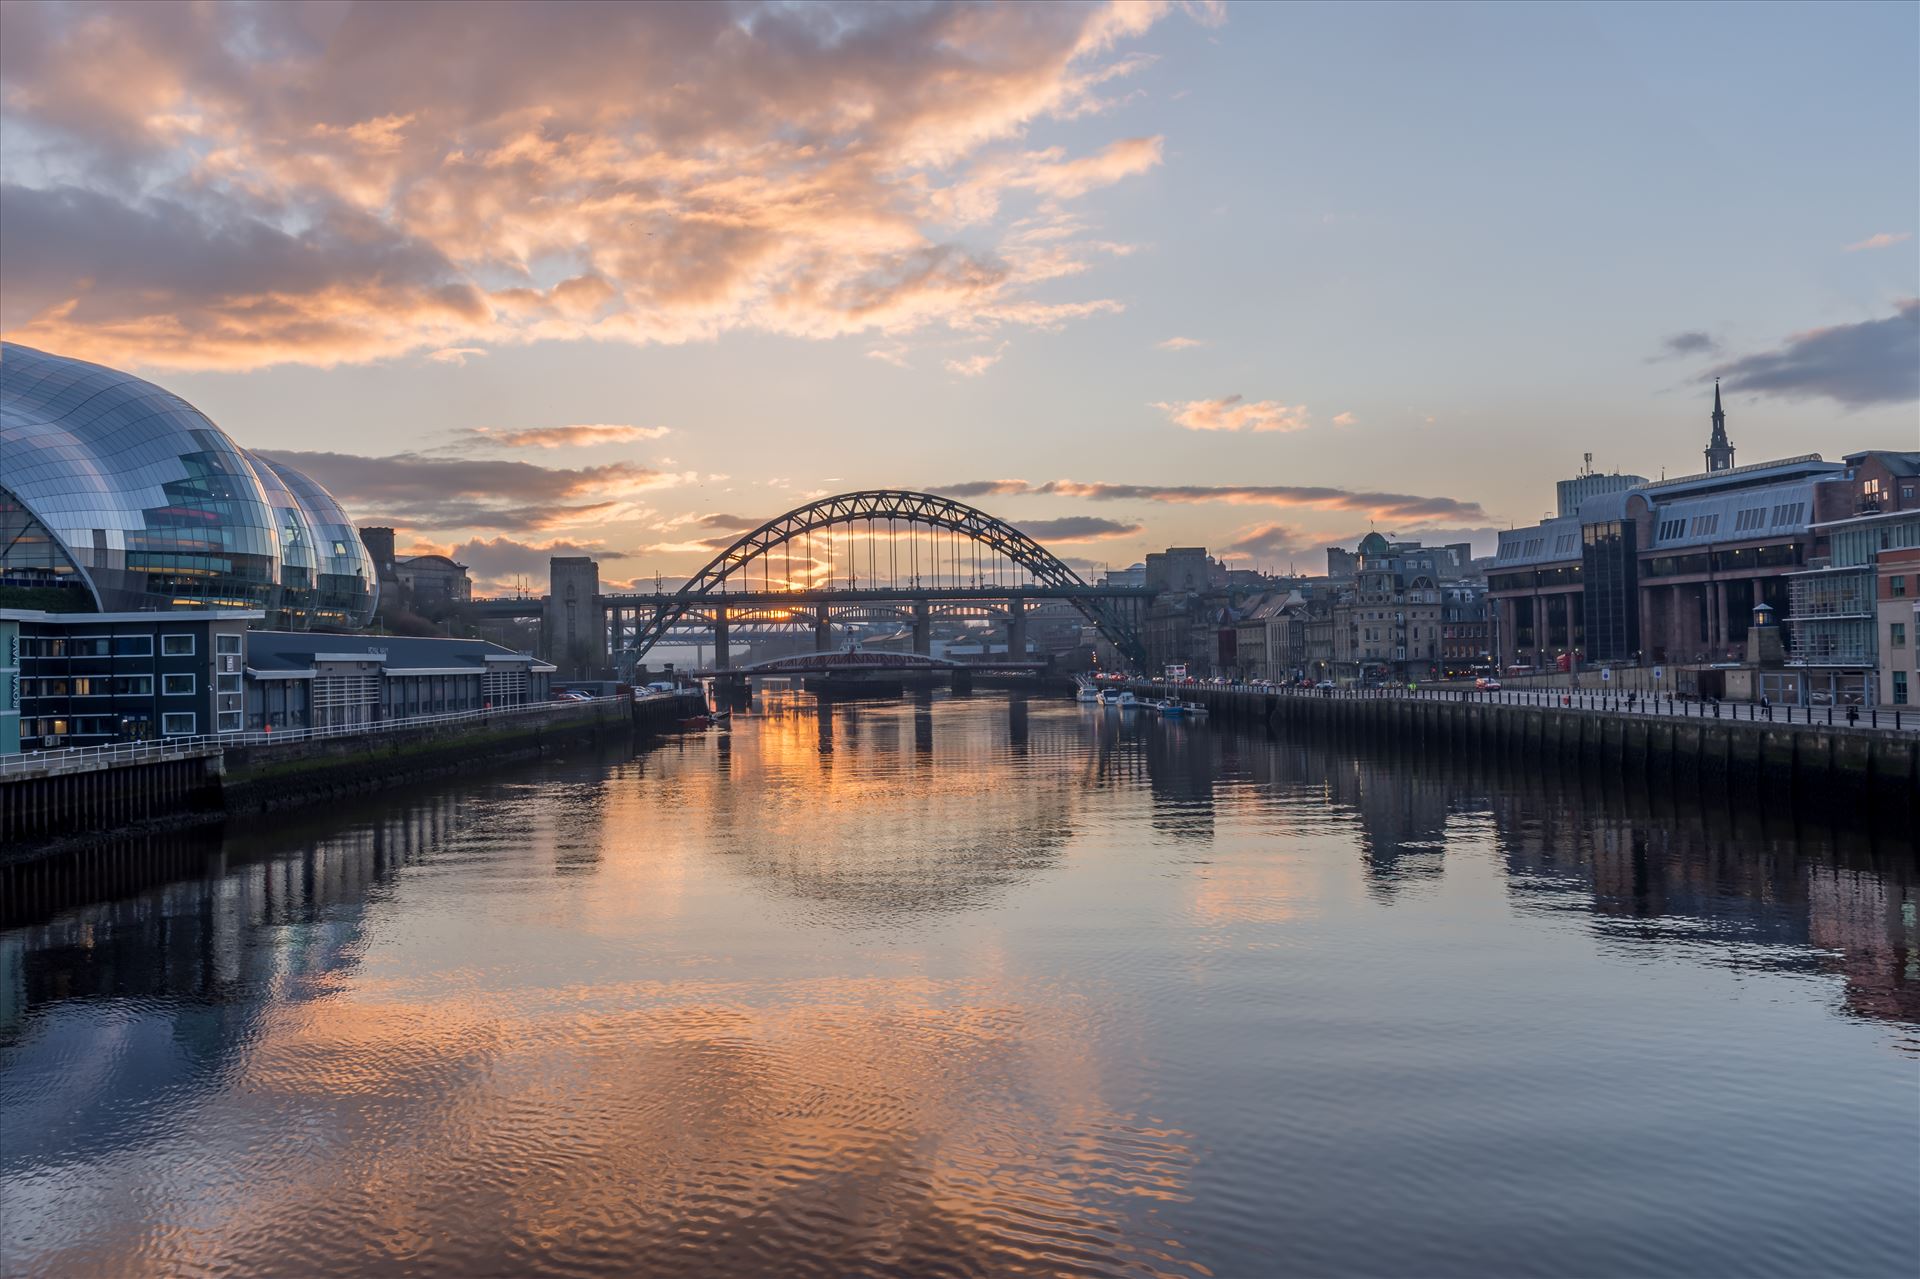 Sunset on the Tyne  by philreay